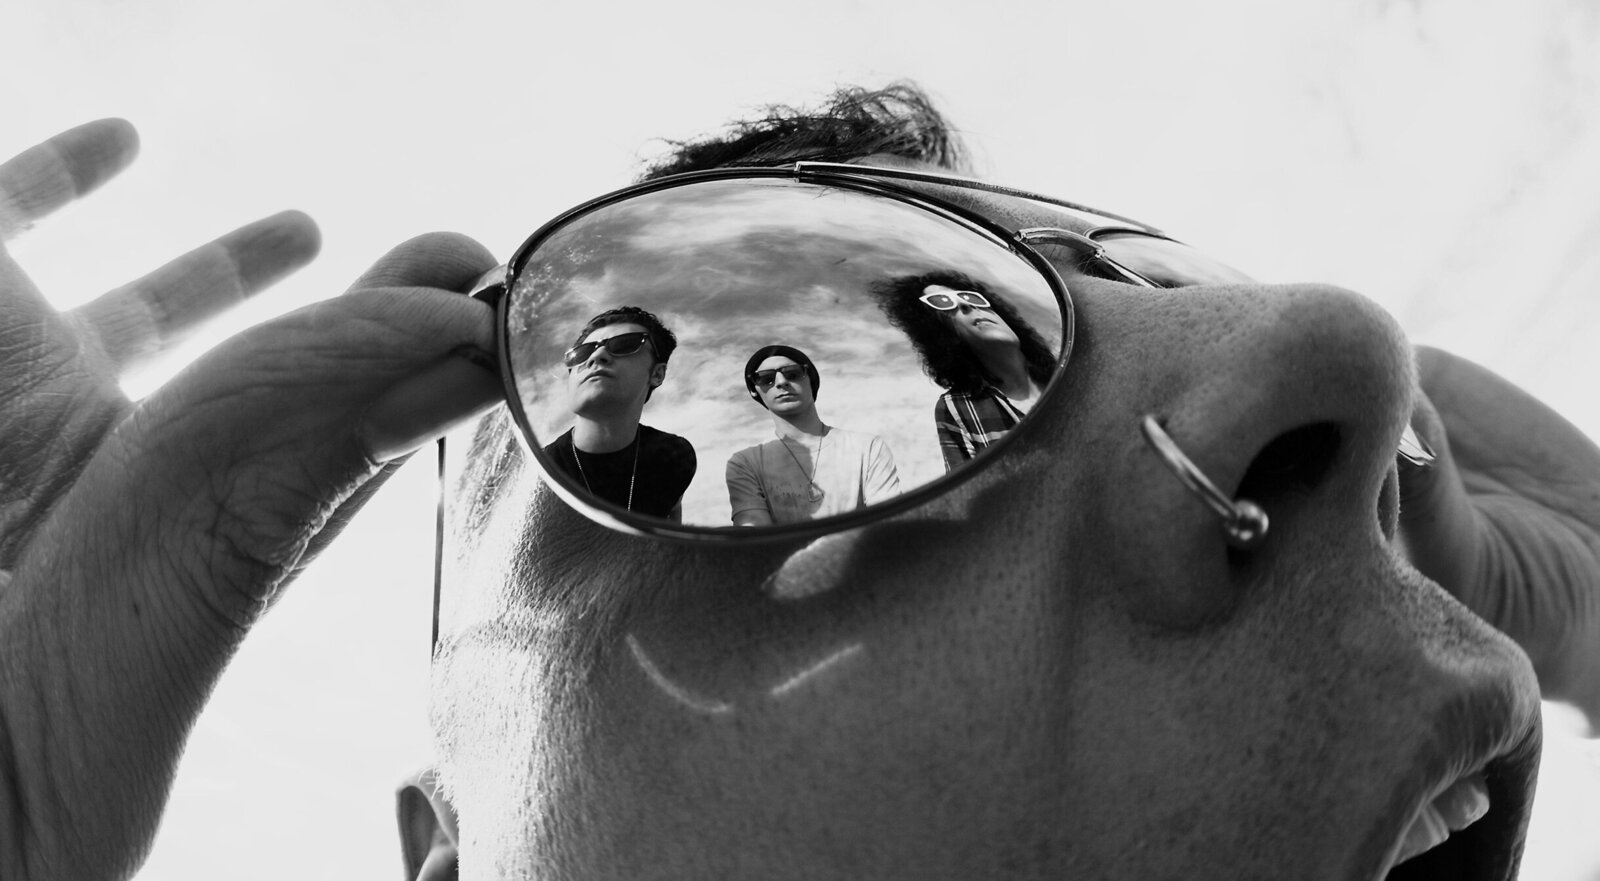 Musician Portrait lead singer band Faber Drive in closeup black and white reflection of band members in his sunglasses